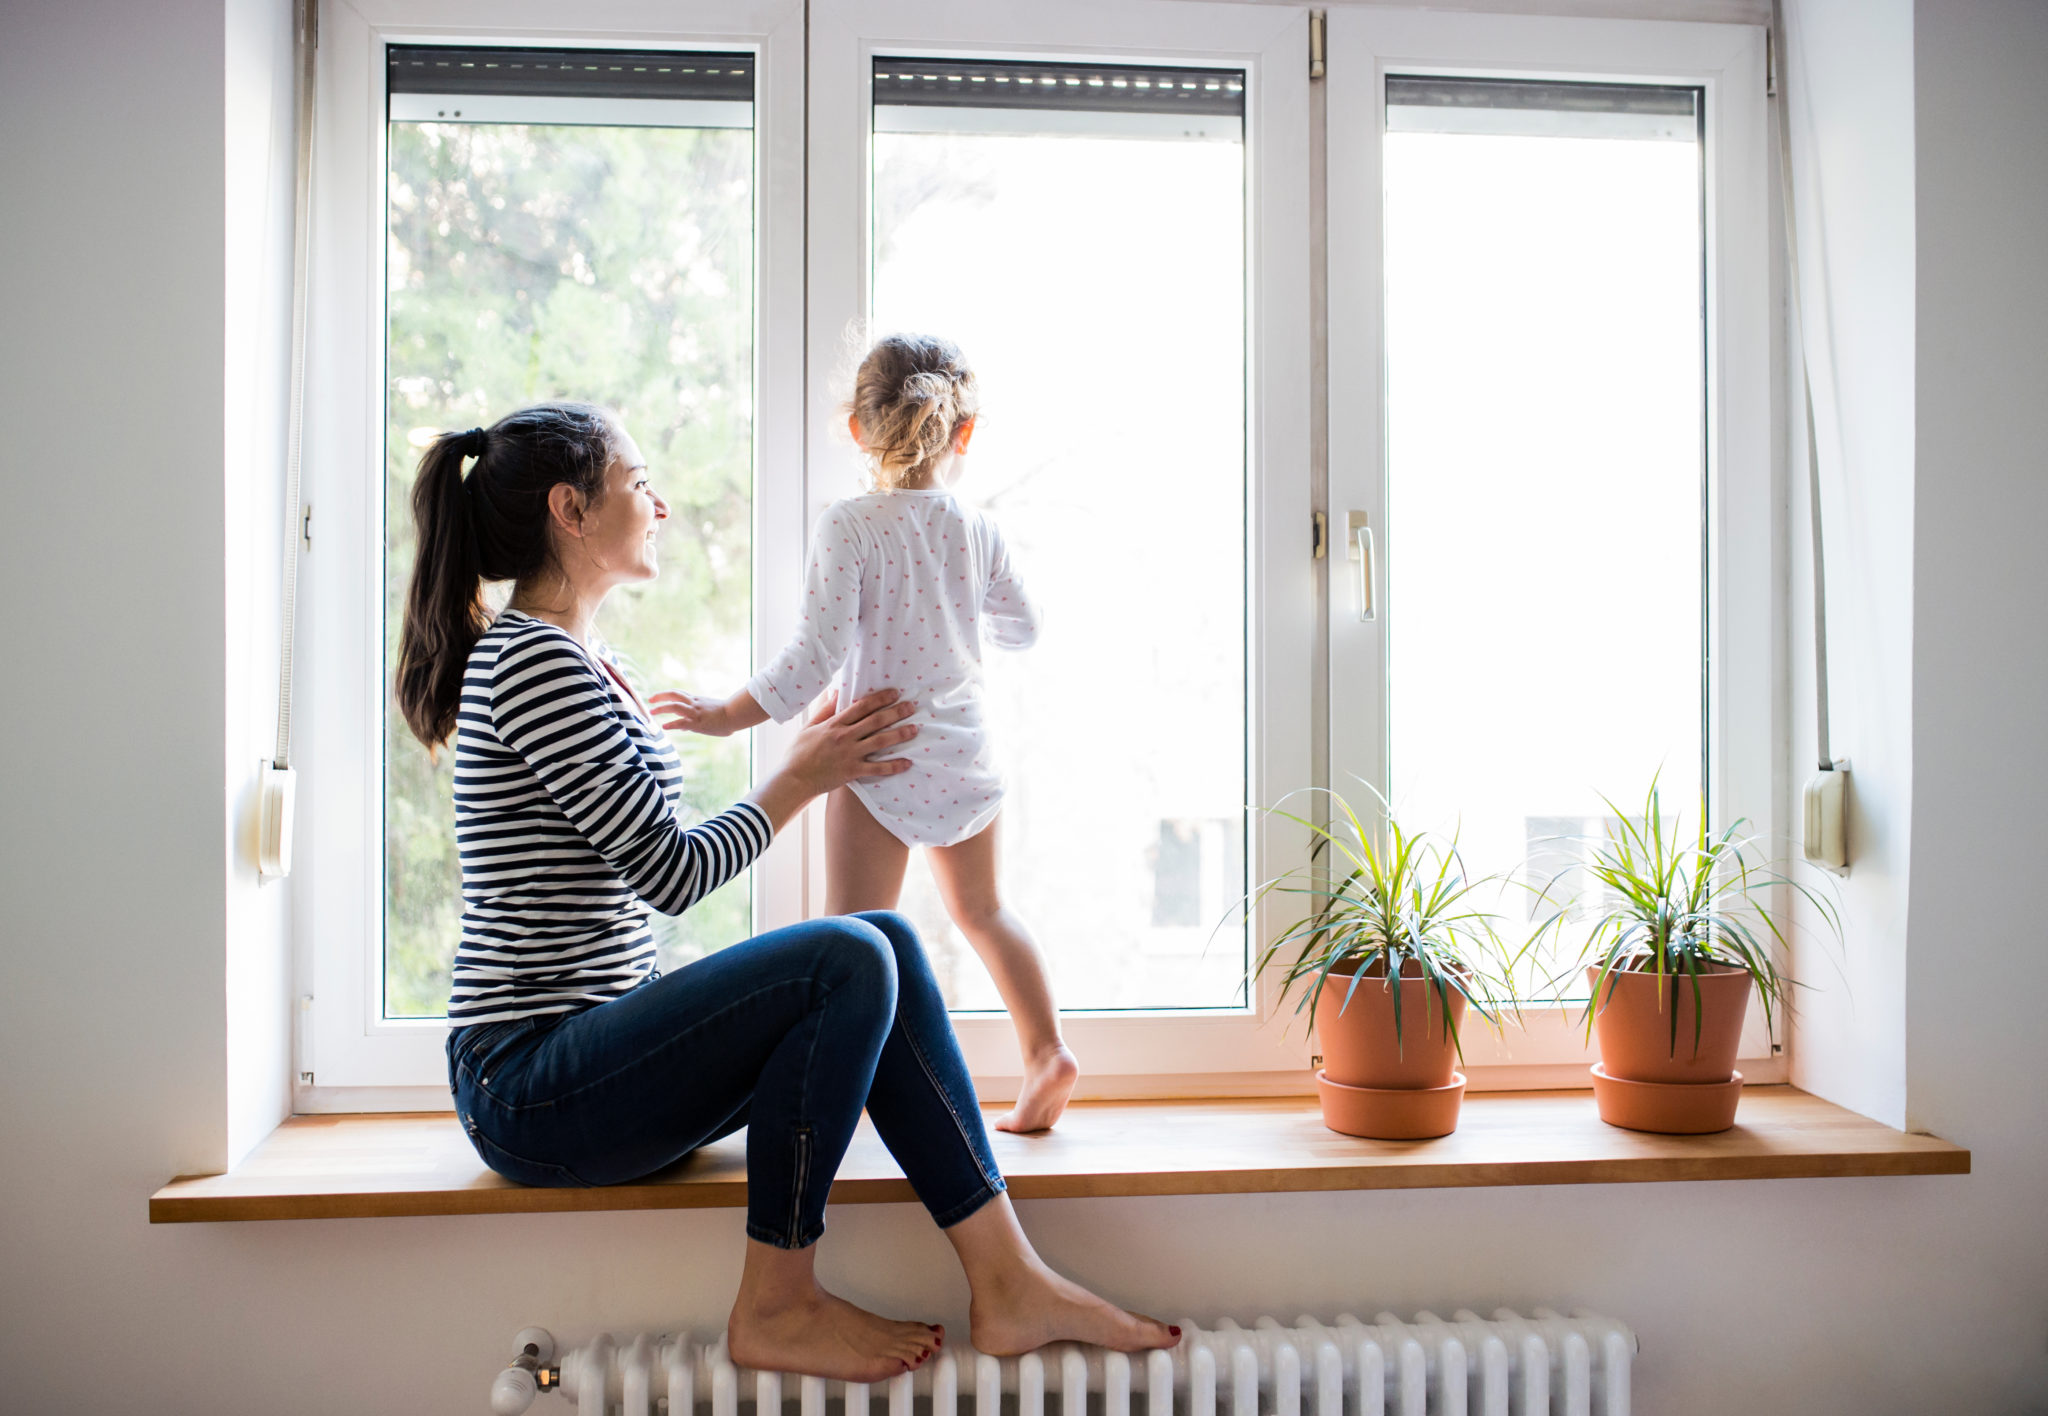 Mother sits on a window sill with child standing on hot water radiator